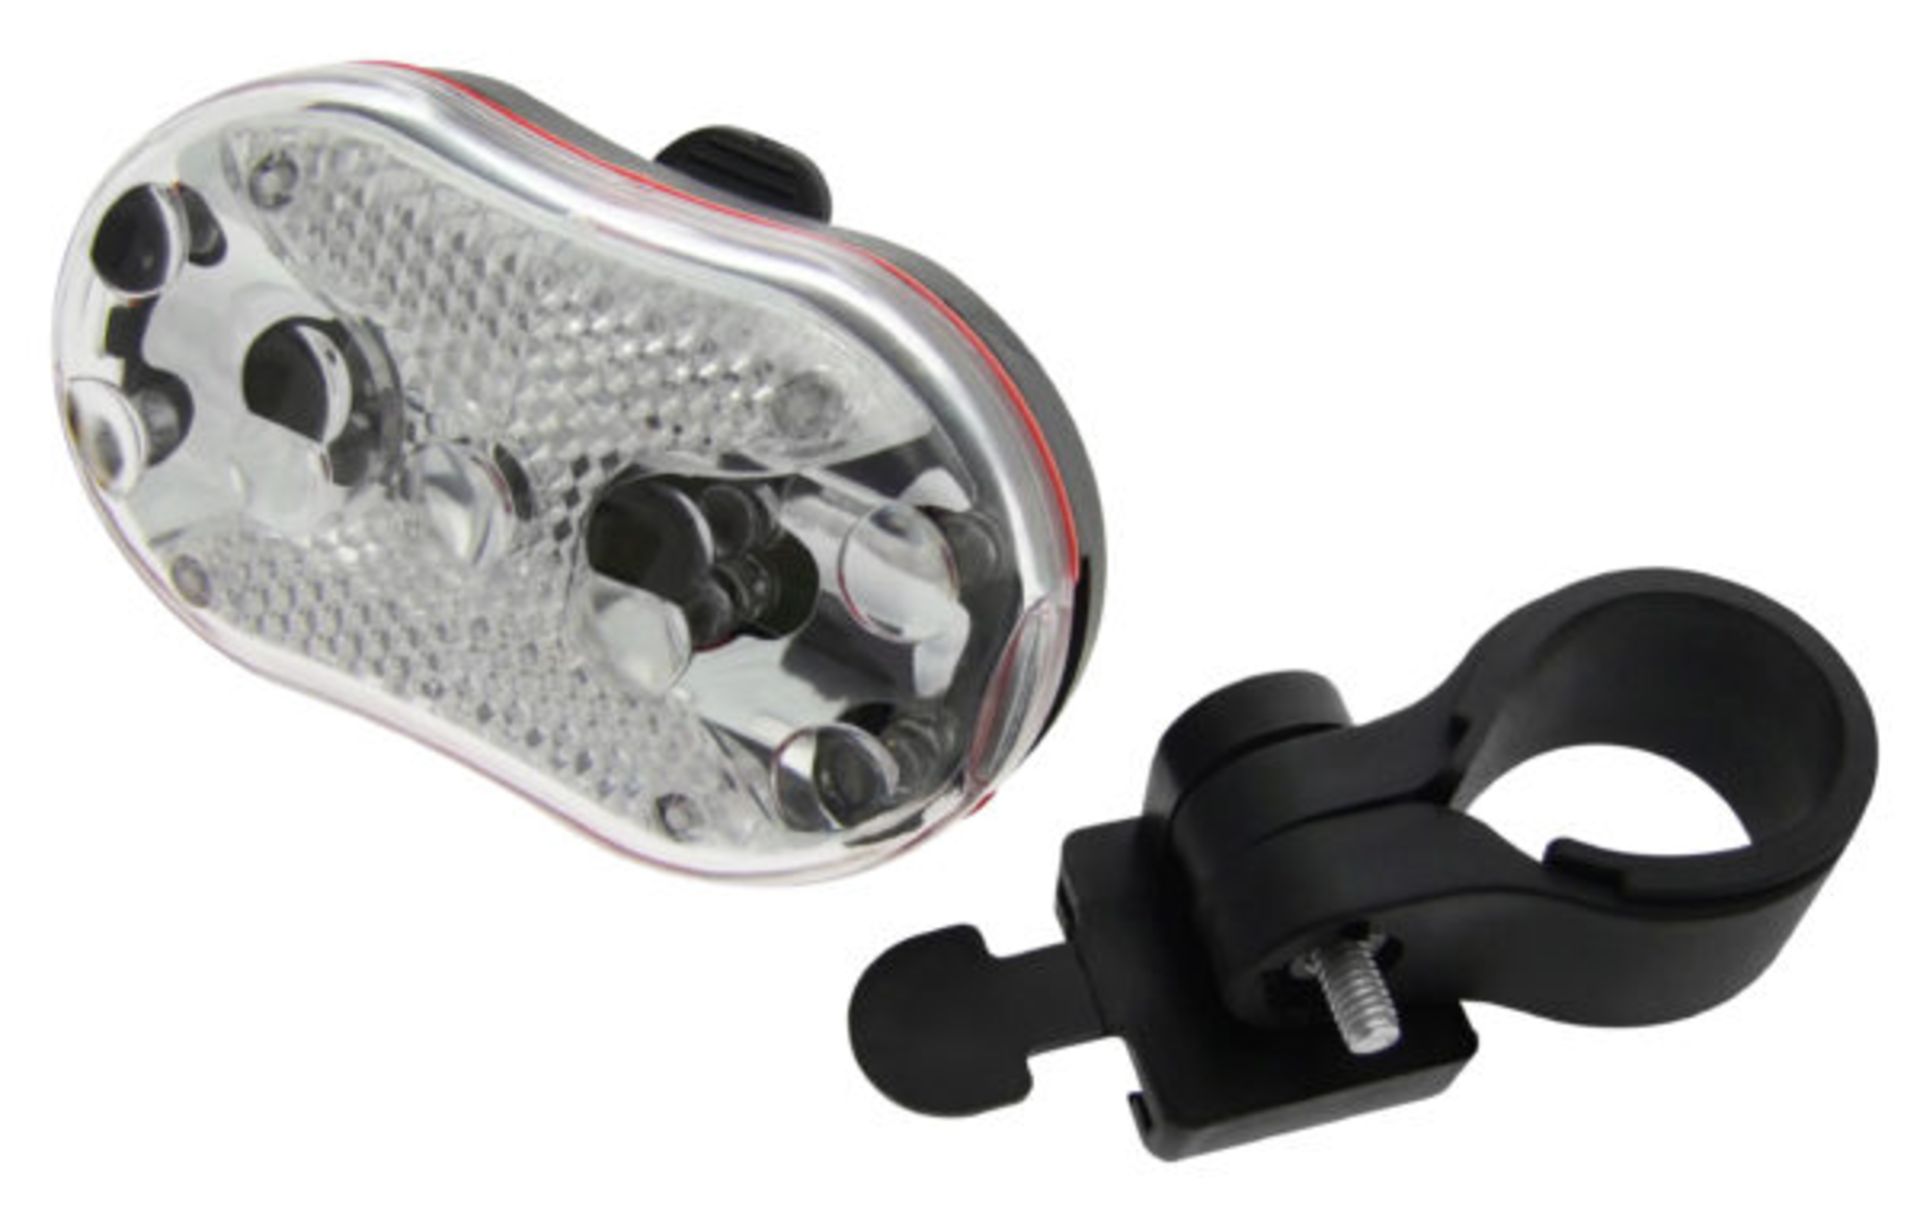 V Brand New 9 LED Front Bicycle Light - 7 Modes - Belt Clip - Mounting Bracket X 2 YOUR BID PRICE TO